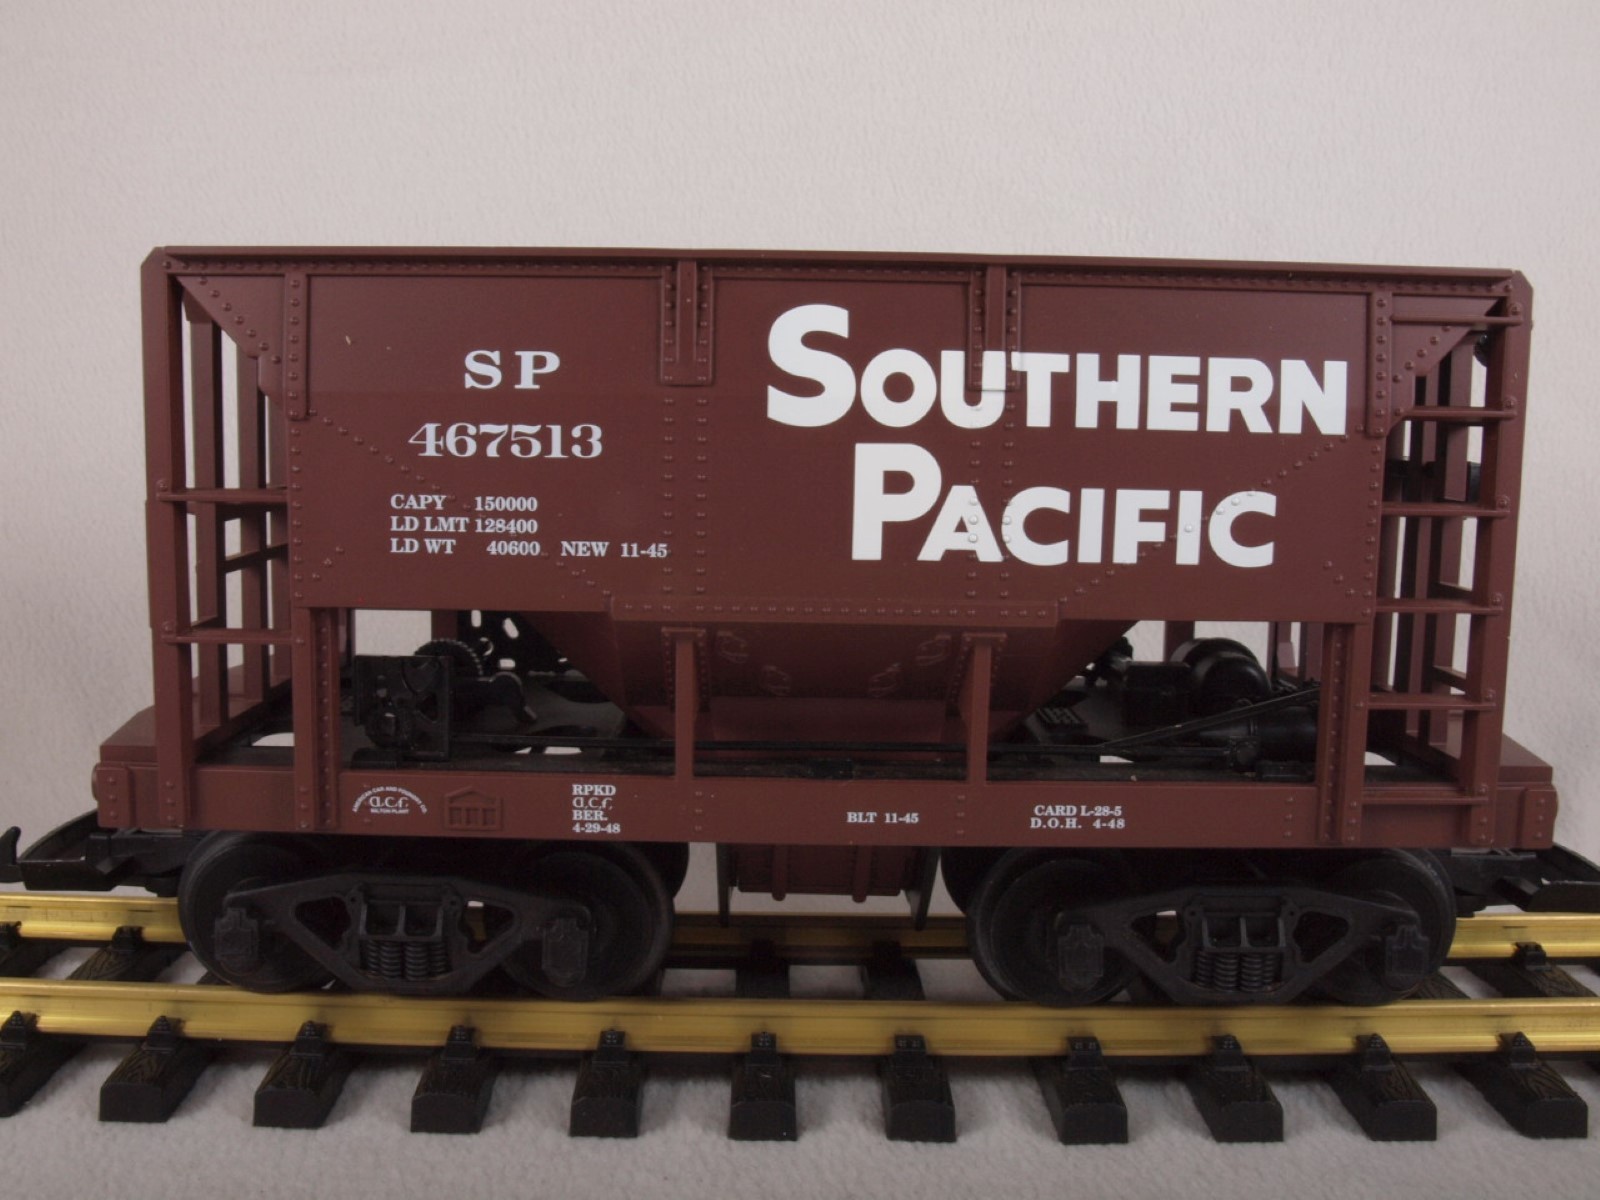 R14205 Southern Pacific #467513